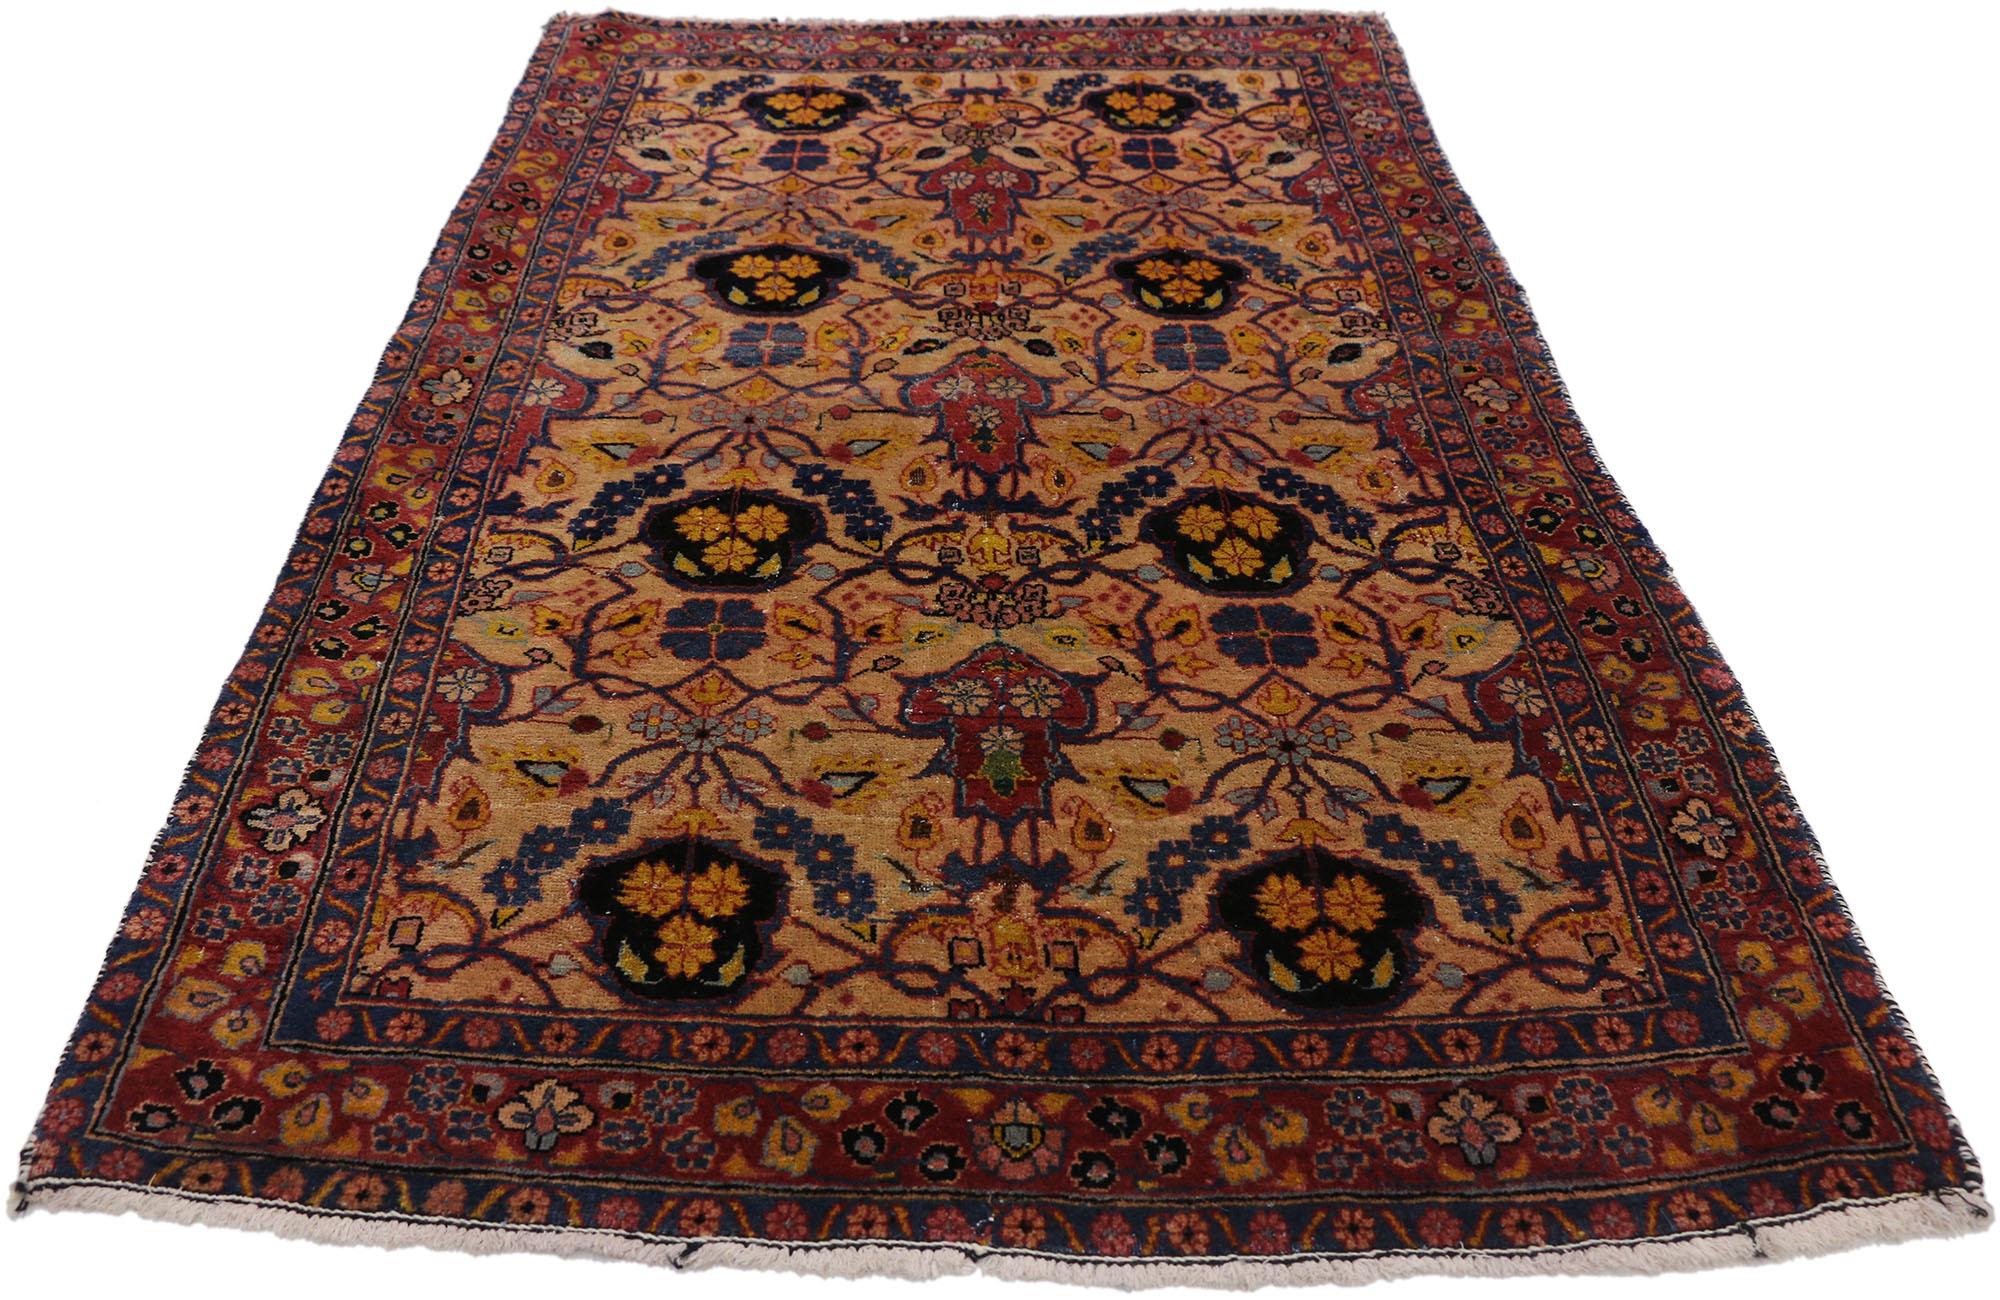 Antique Persian Kashan Accent Rug, Foyer or Entry Rug 6